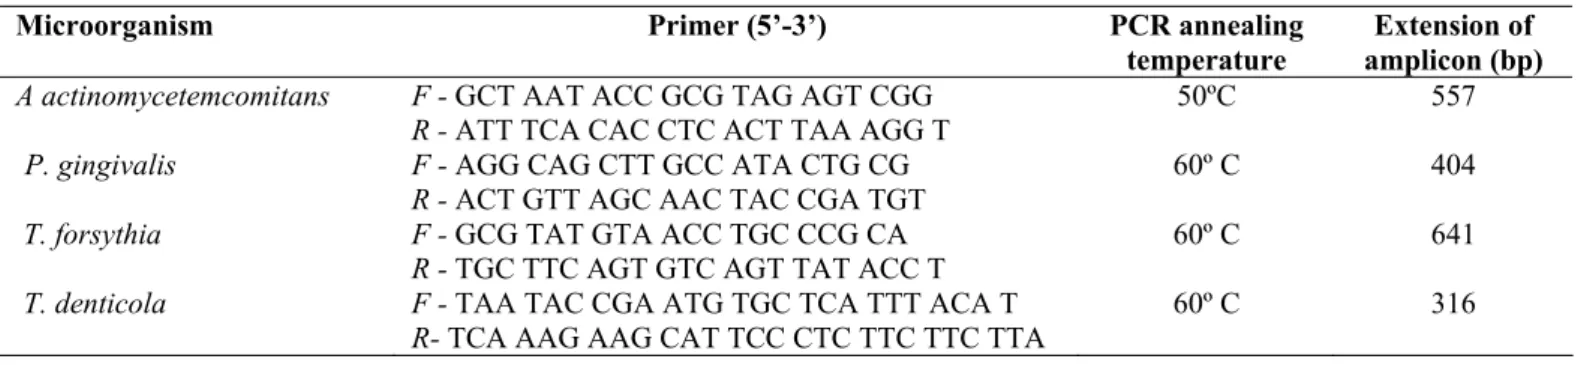 Table 1. Microorganisms and specific primers for PCR. 